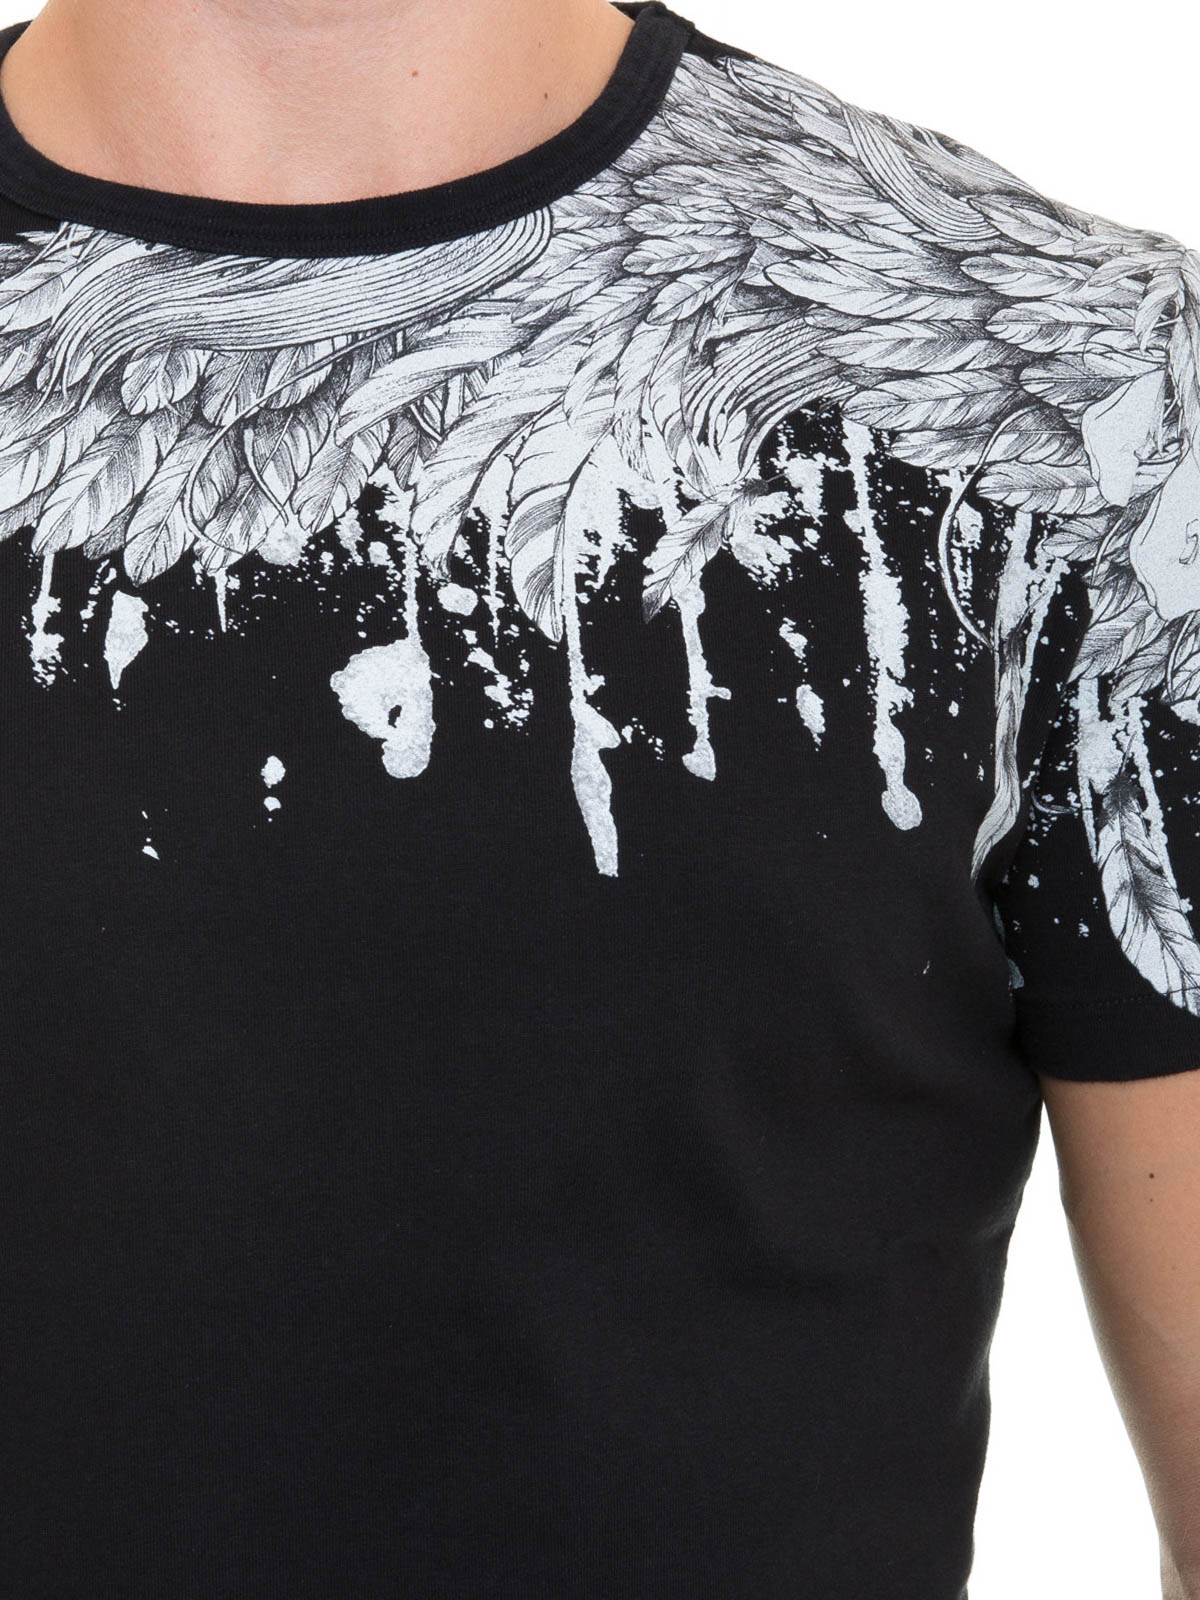 Productief materiaal tapijt T-shirts Roberto Cavalli - Feathers side print cotton T-shirt -  DM713Y2406A001